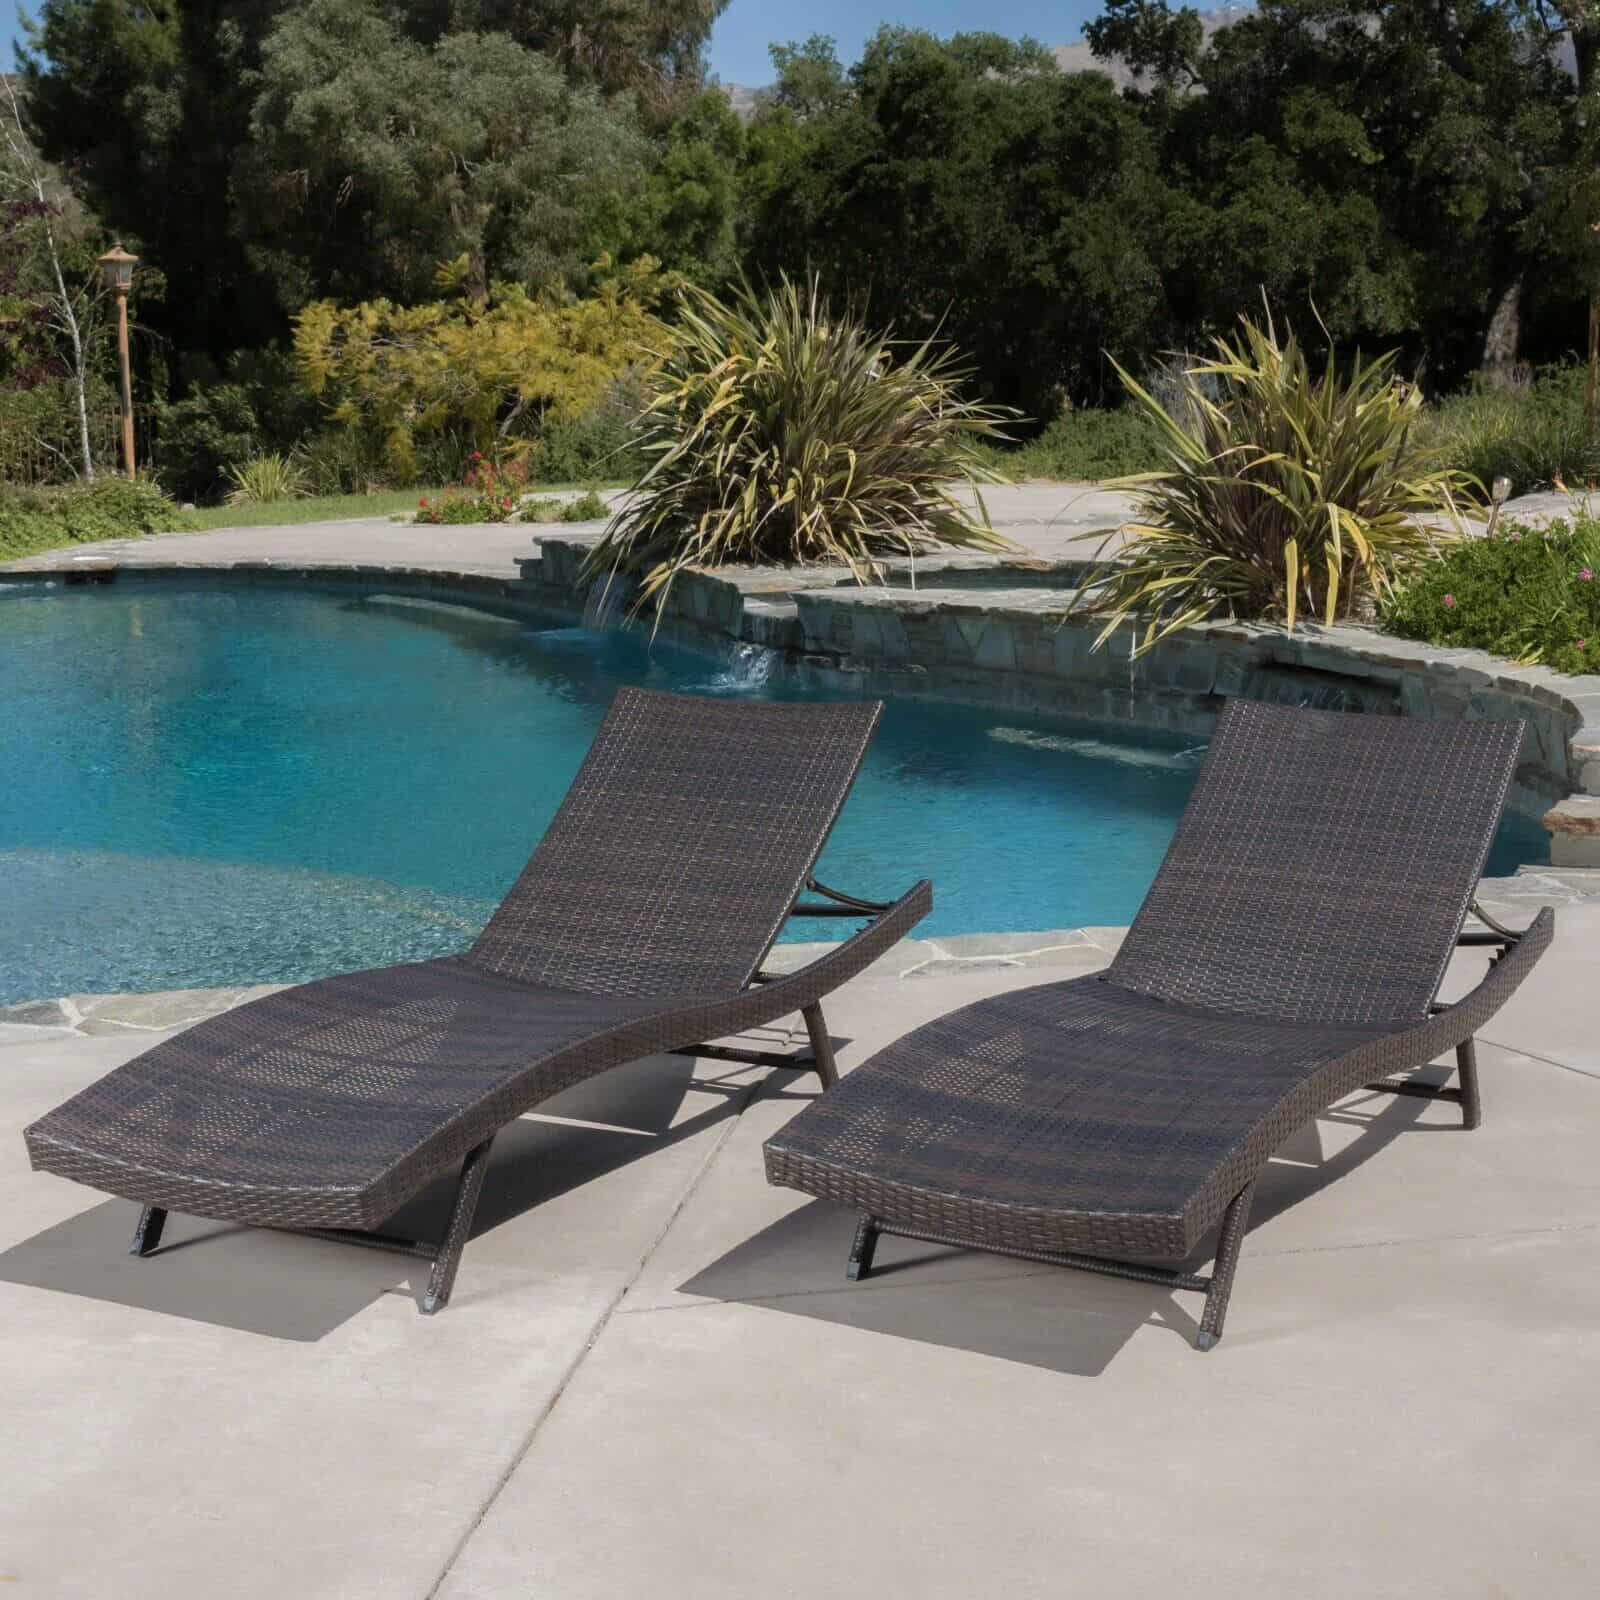 Two chaise loungers in front of a pool.